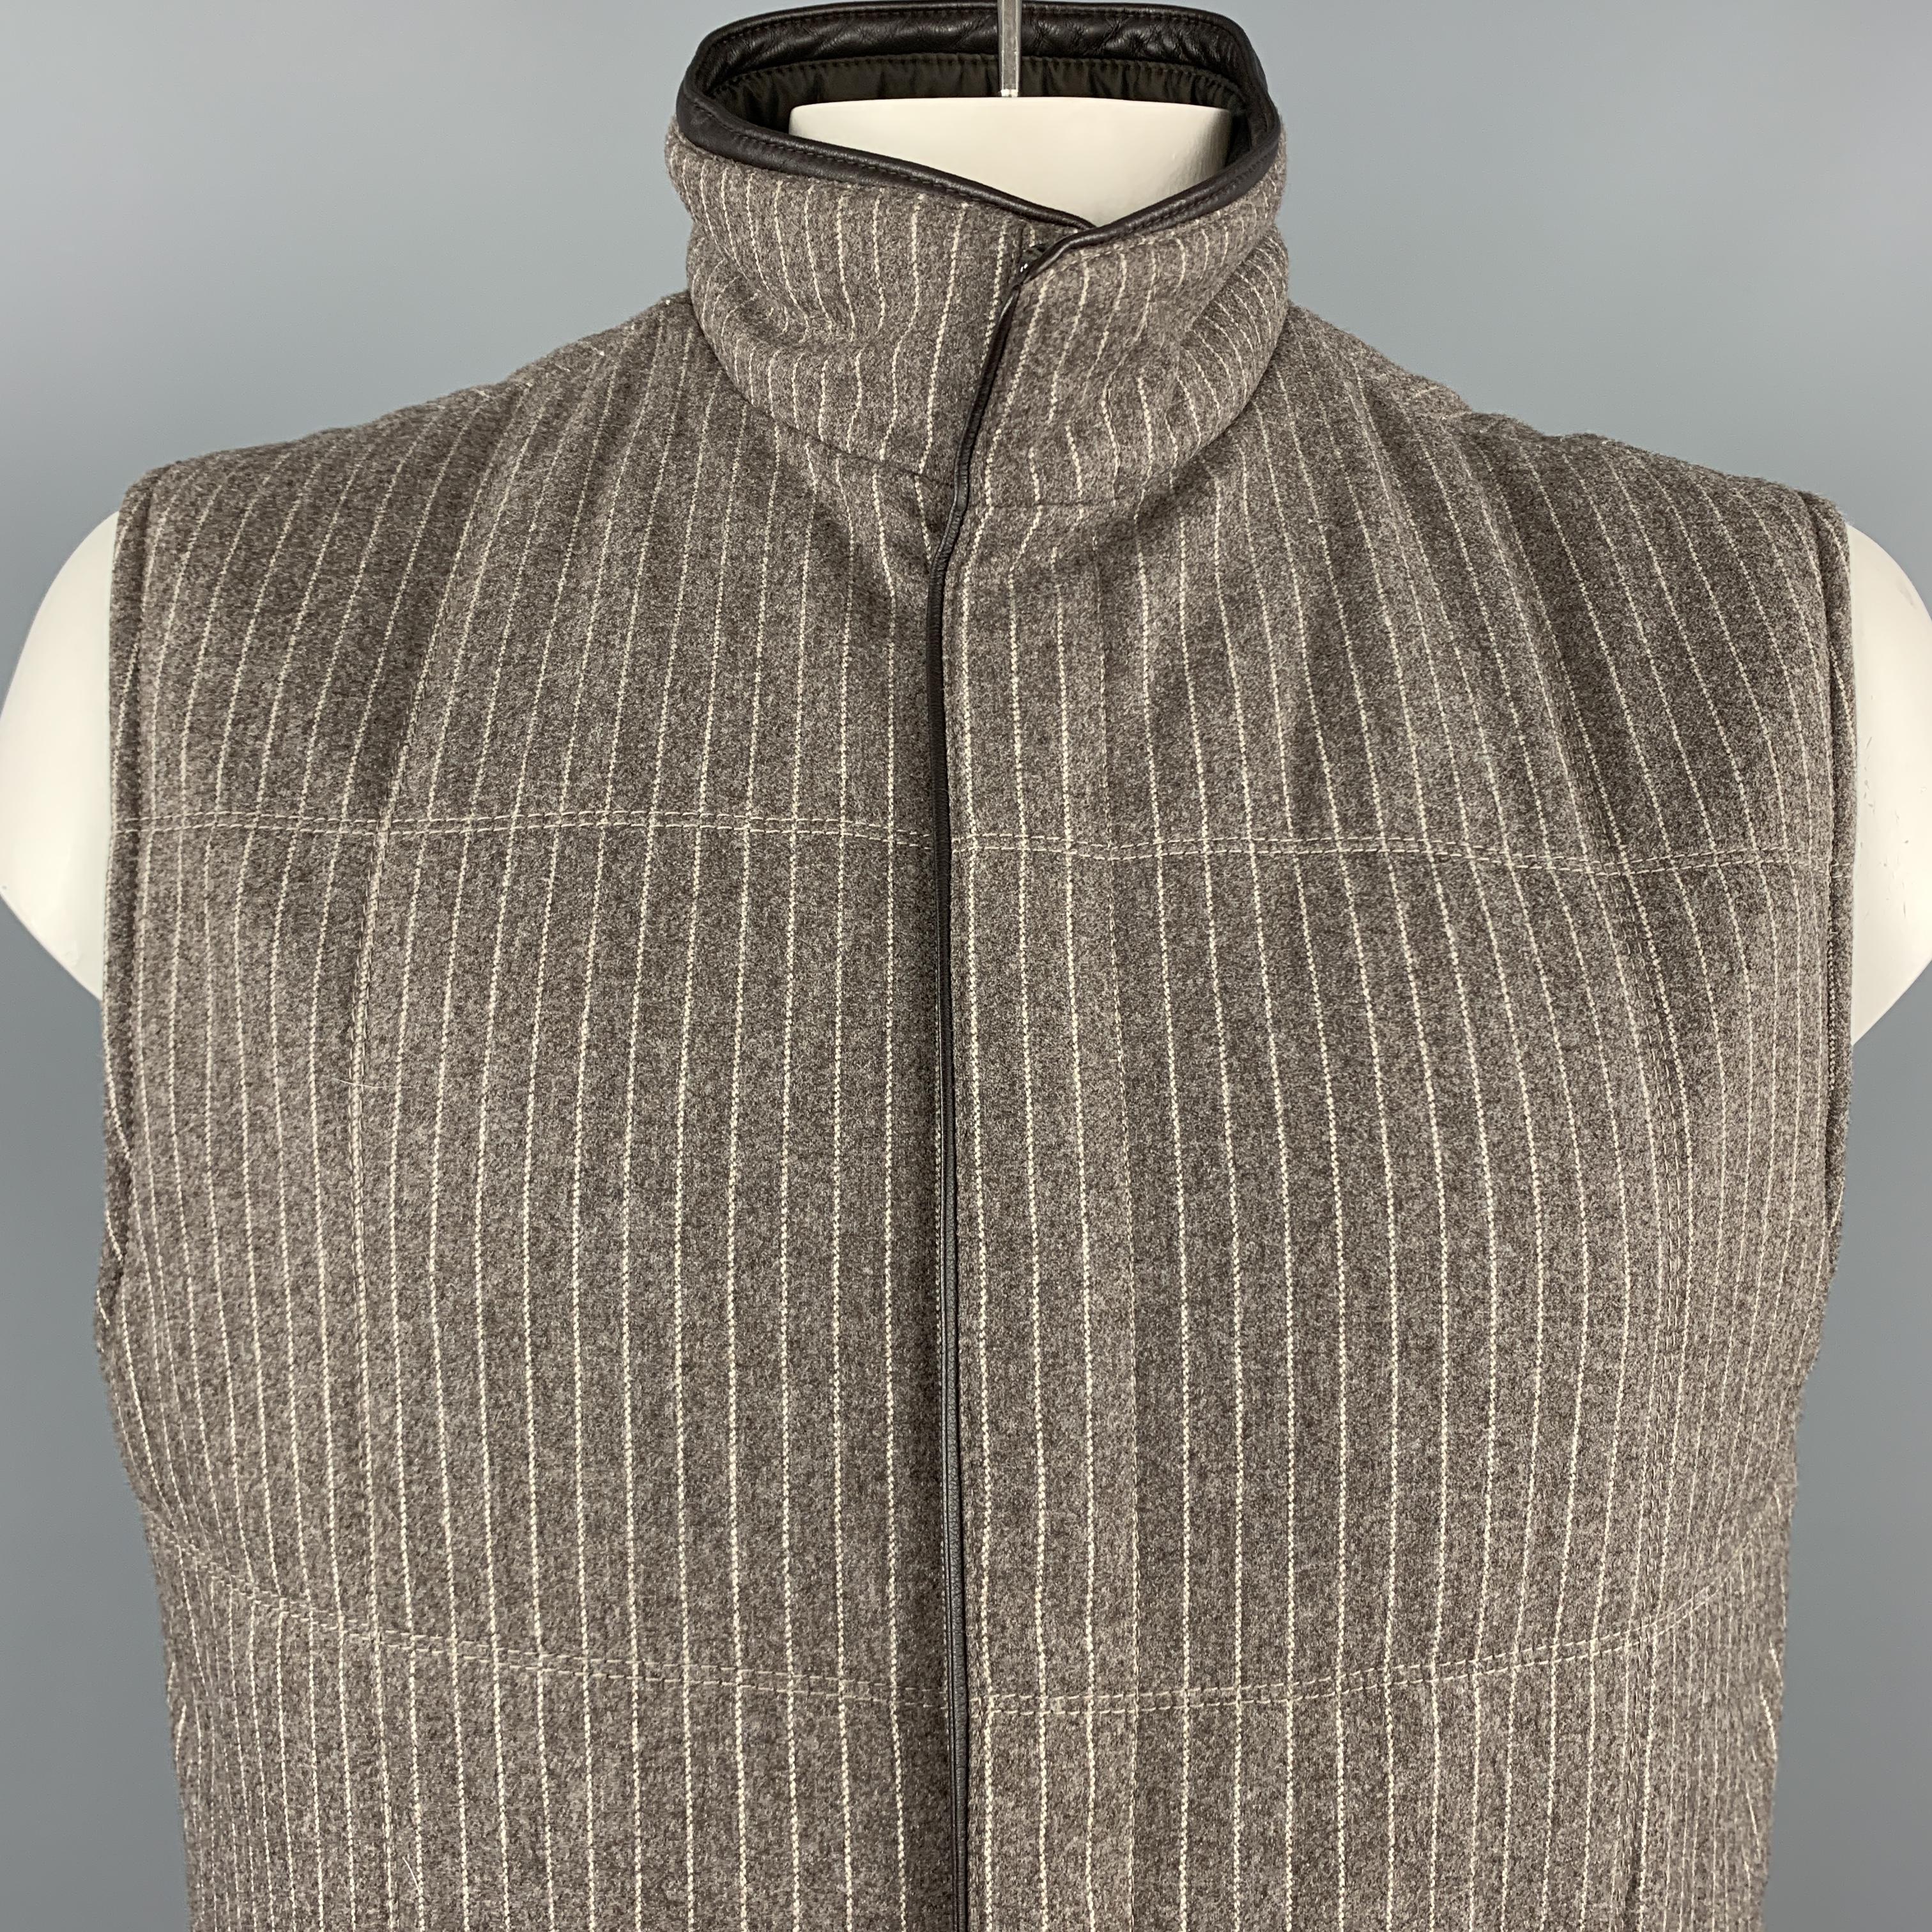 This classic ERMENEGILDO ZEGNA vest comes in a muted taupe gray & cream pinstriped wool cashmere blend felt and features a high collar, hidden double zip closure, chocolate brown leather piping, and four zip pockets. Reversible to a deep brown nylon